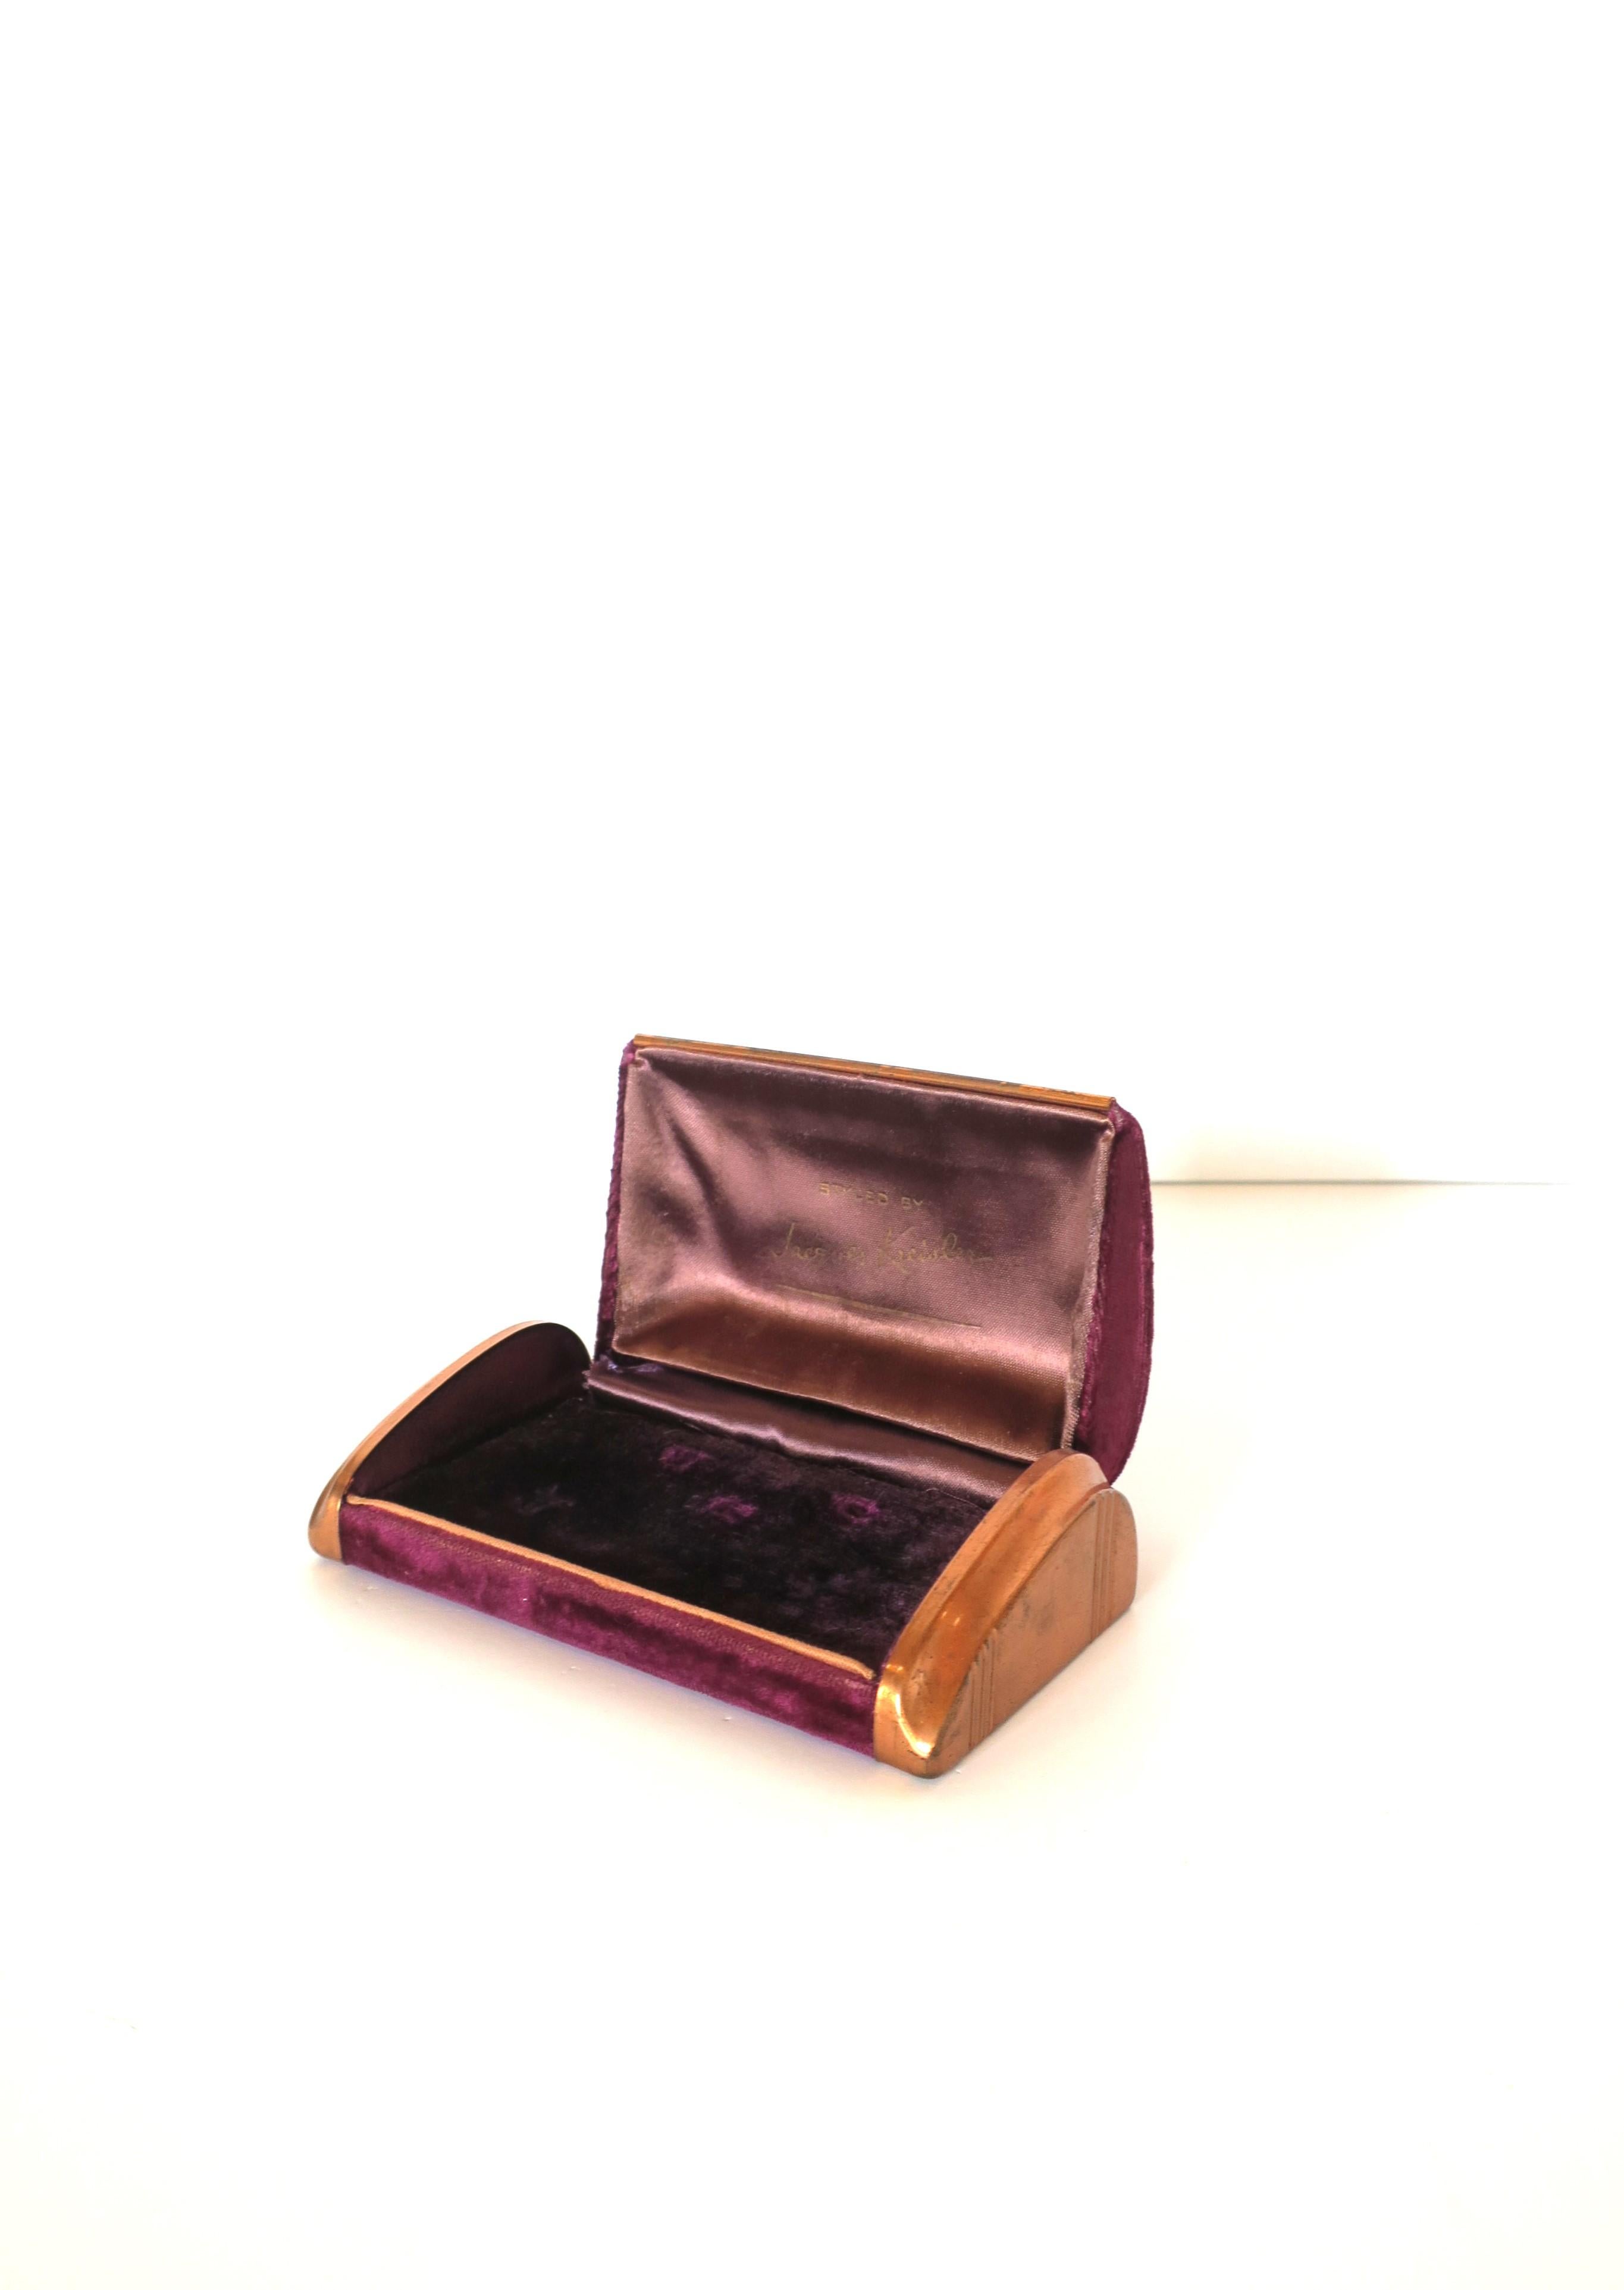 A beautiful antique Art Deco period jewelry box, styled by Jacques Kreisler, circa early-20th Century, New York, New York. Box is an aubergine hue in velvet and satin, finished with copper hued metal sides, easy open/close lid, from the Art Deco